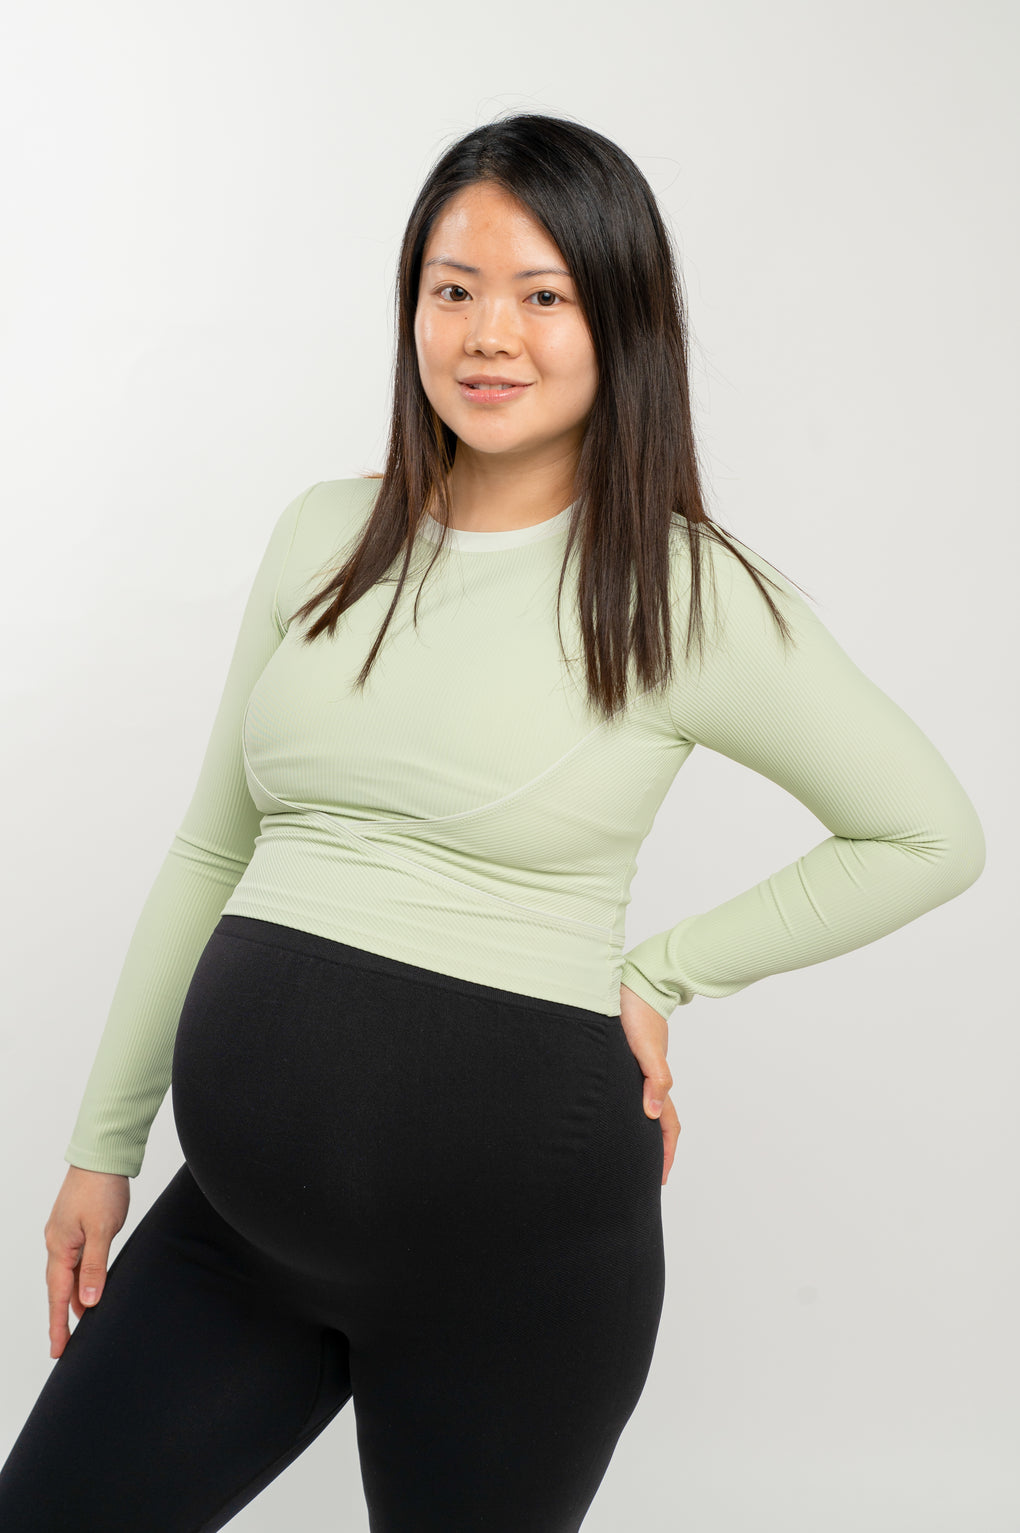 NOTHING FITS BUT Women's Classic Seamless Maternity Leggings